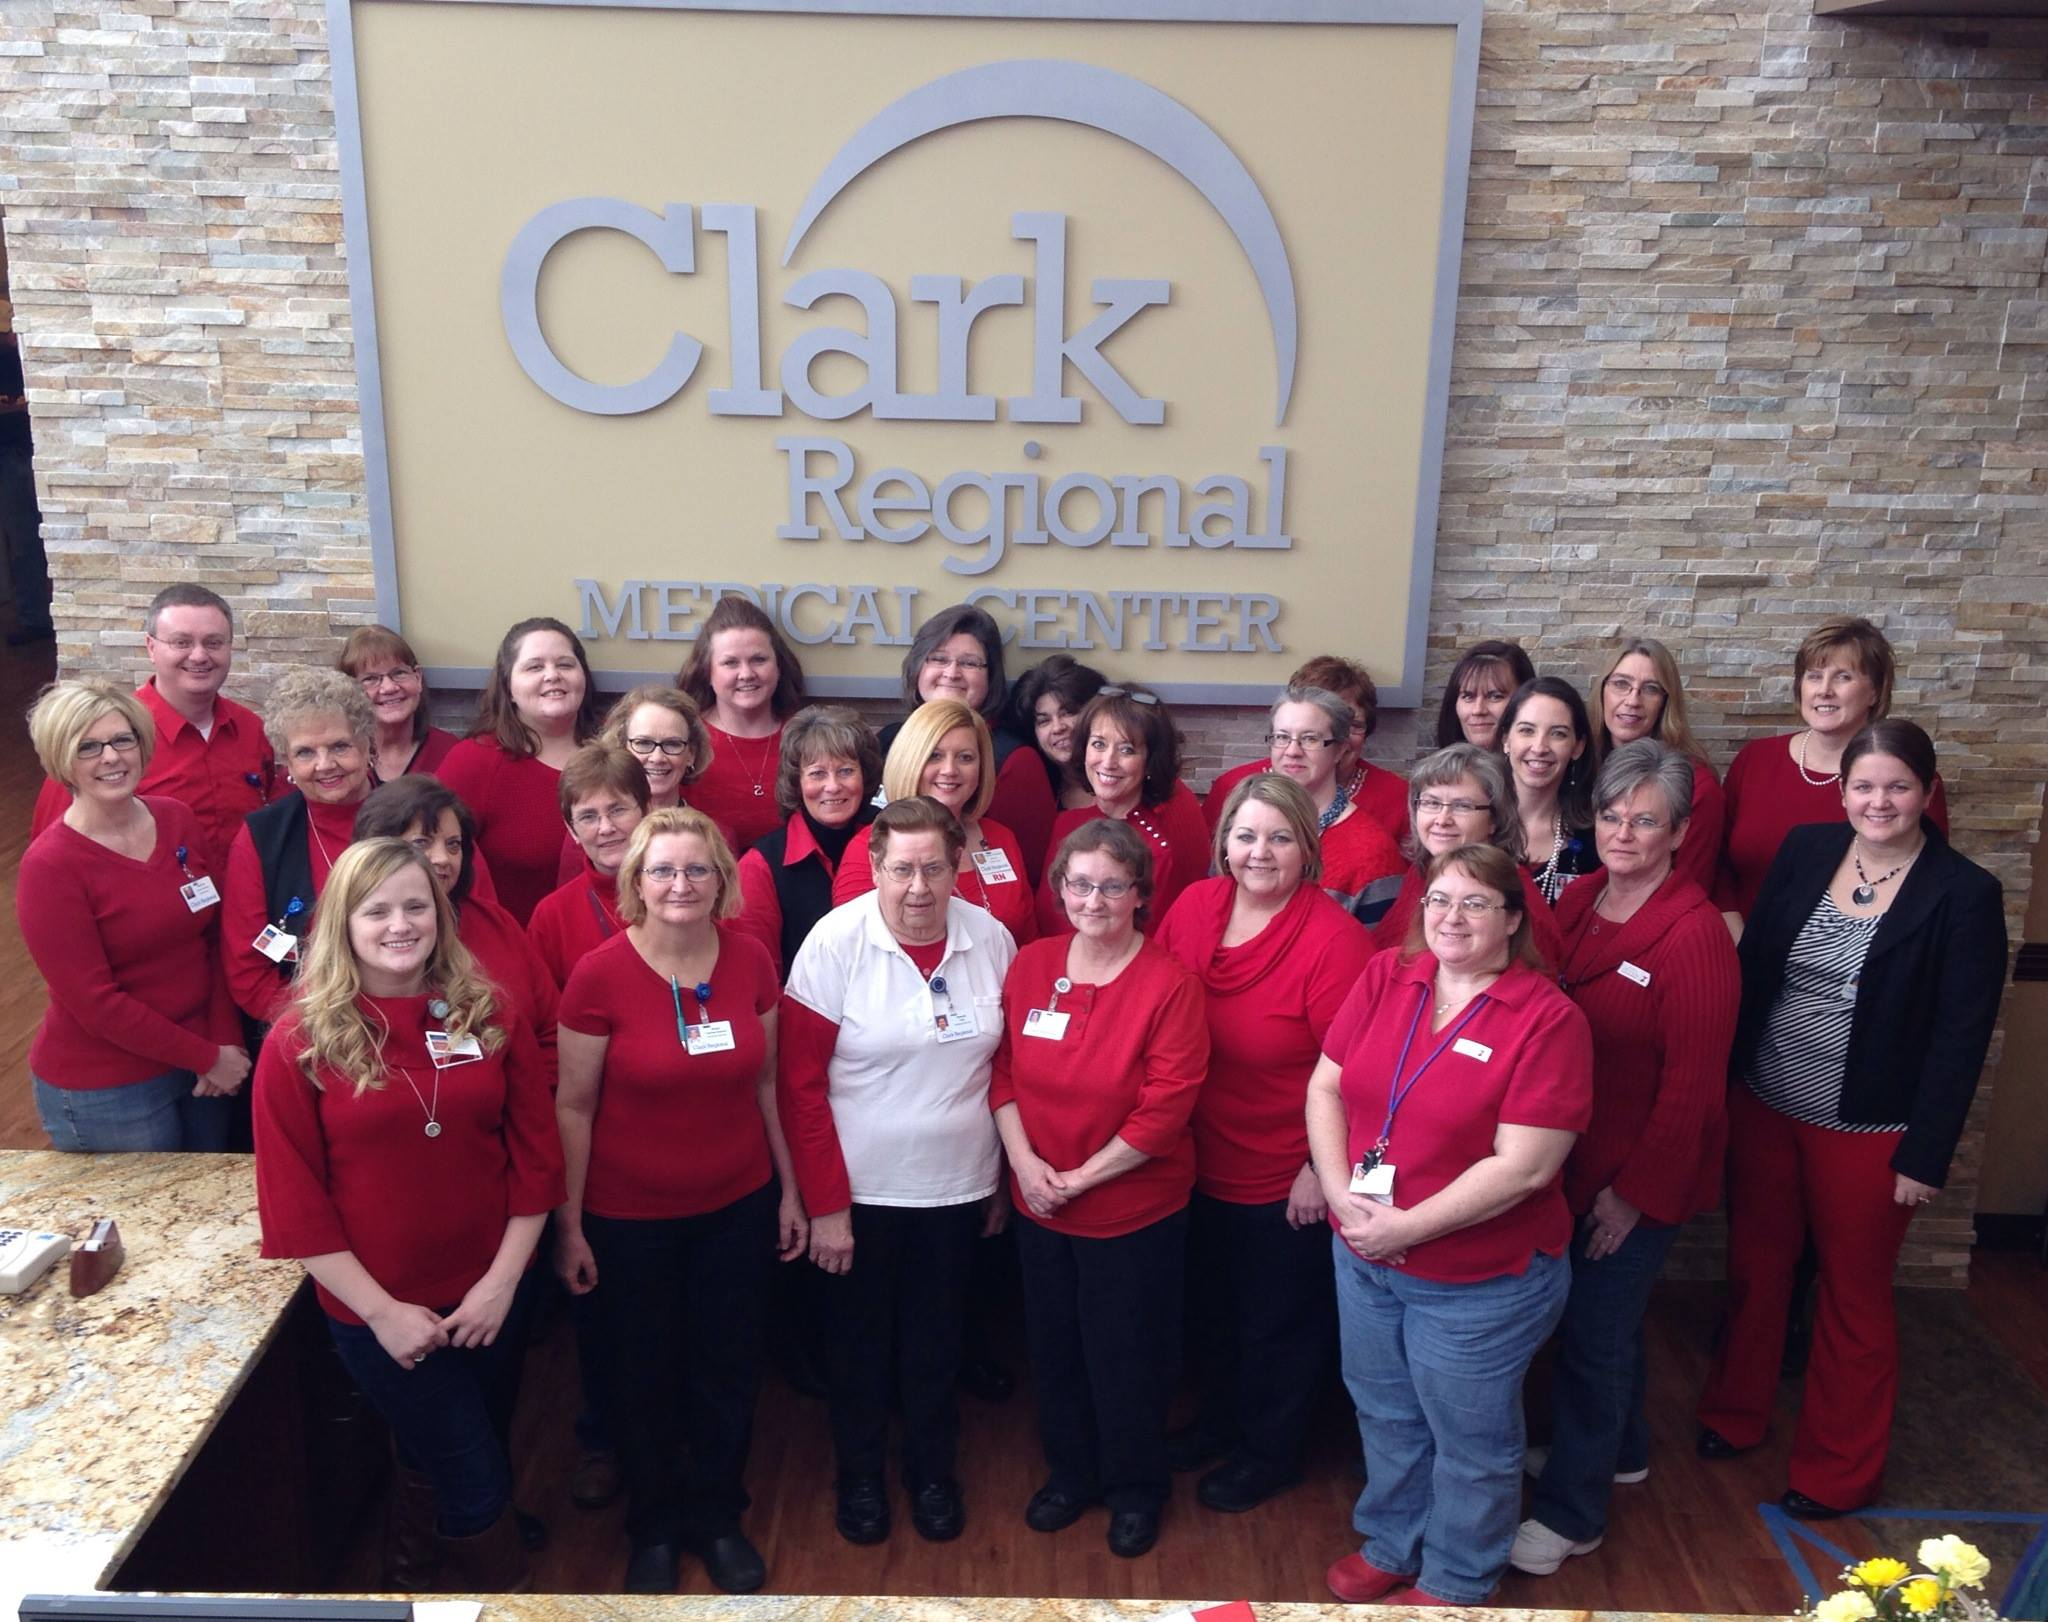 Members of the Clark Regional Medical Center cardiovascular team gathered for a photo in front of their signage.